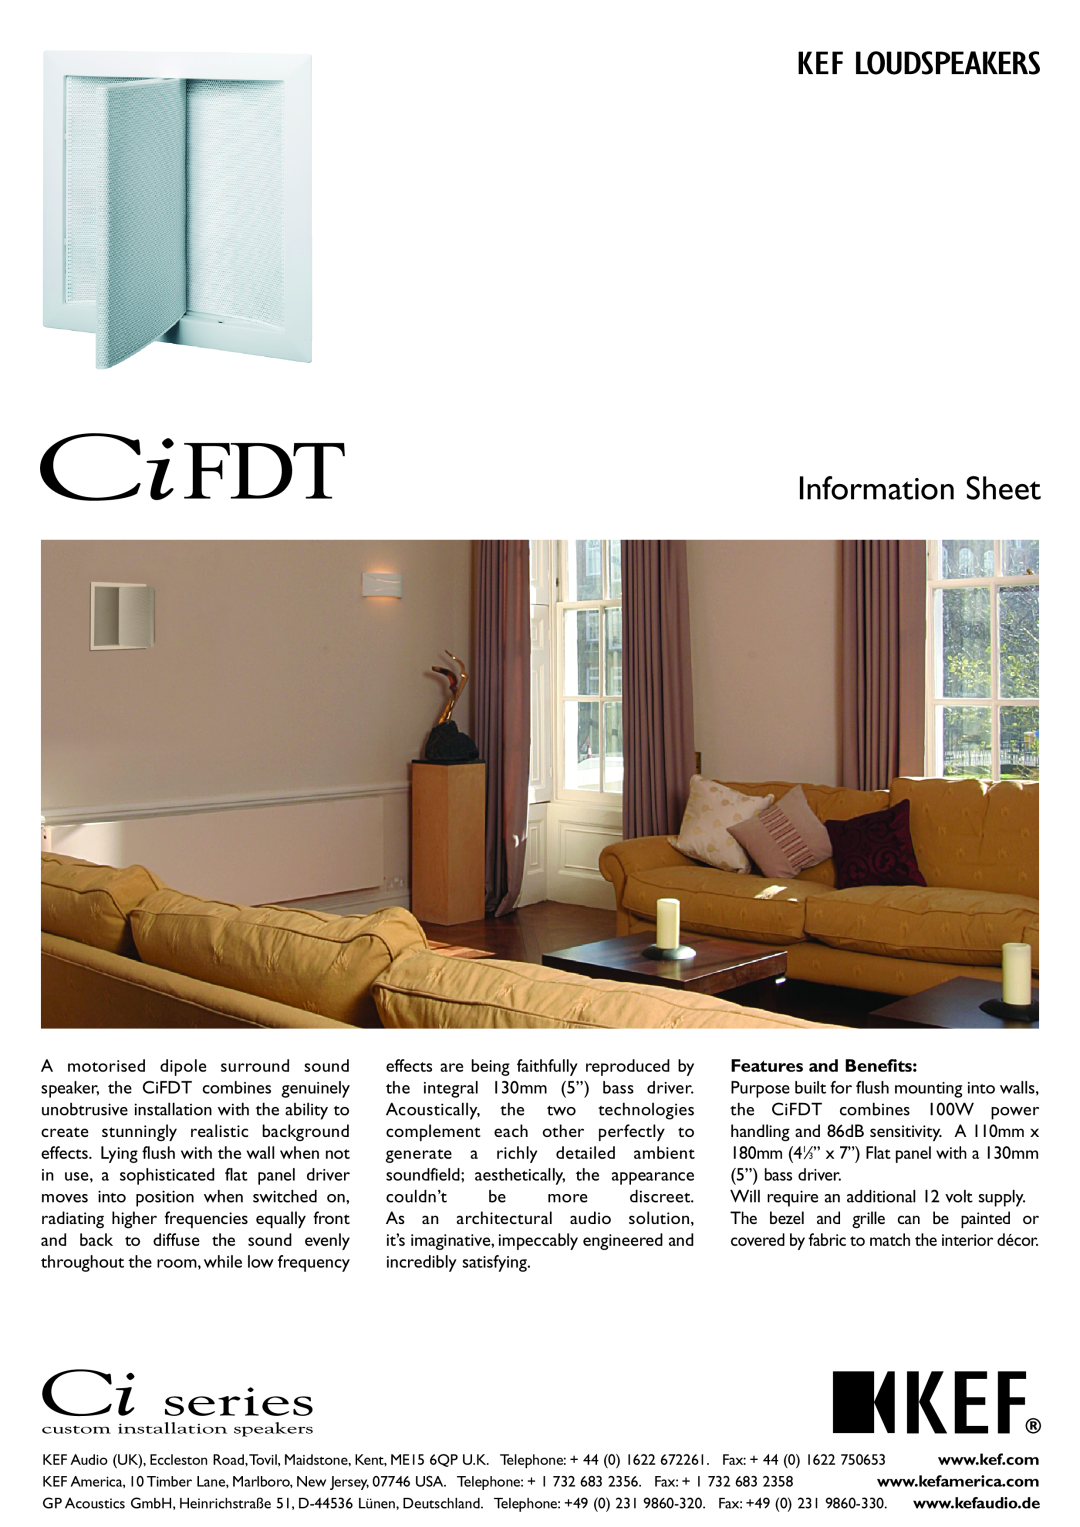 KEF Audio CiFDT manual Features and Benefits, Information Sheet 